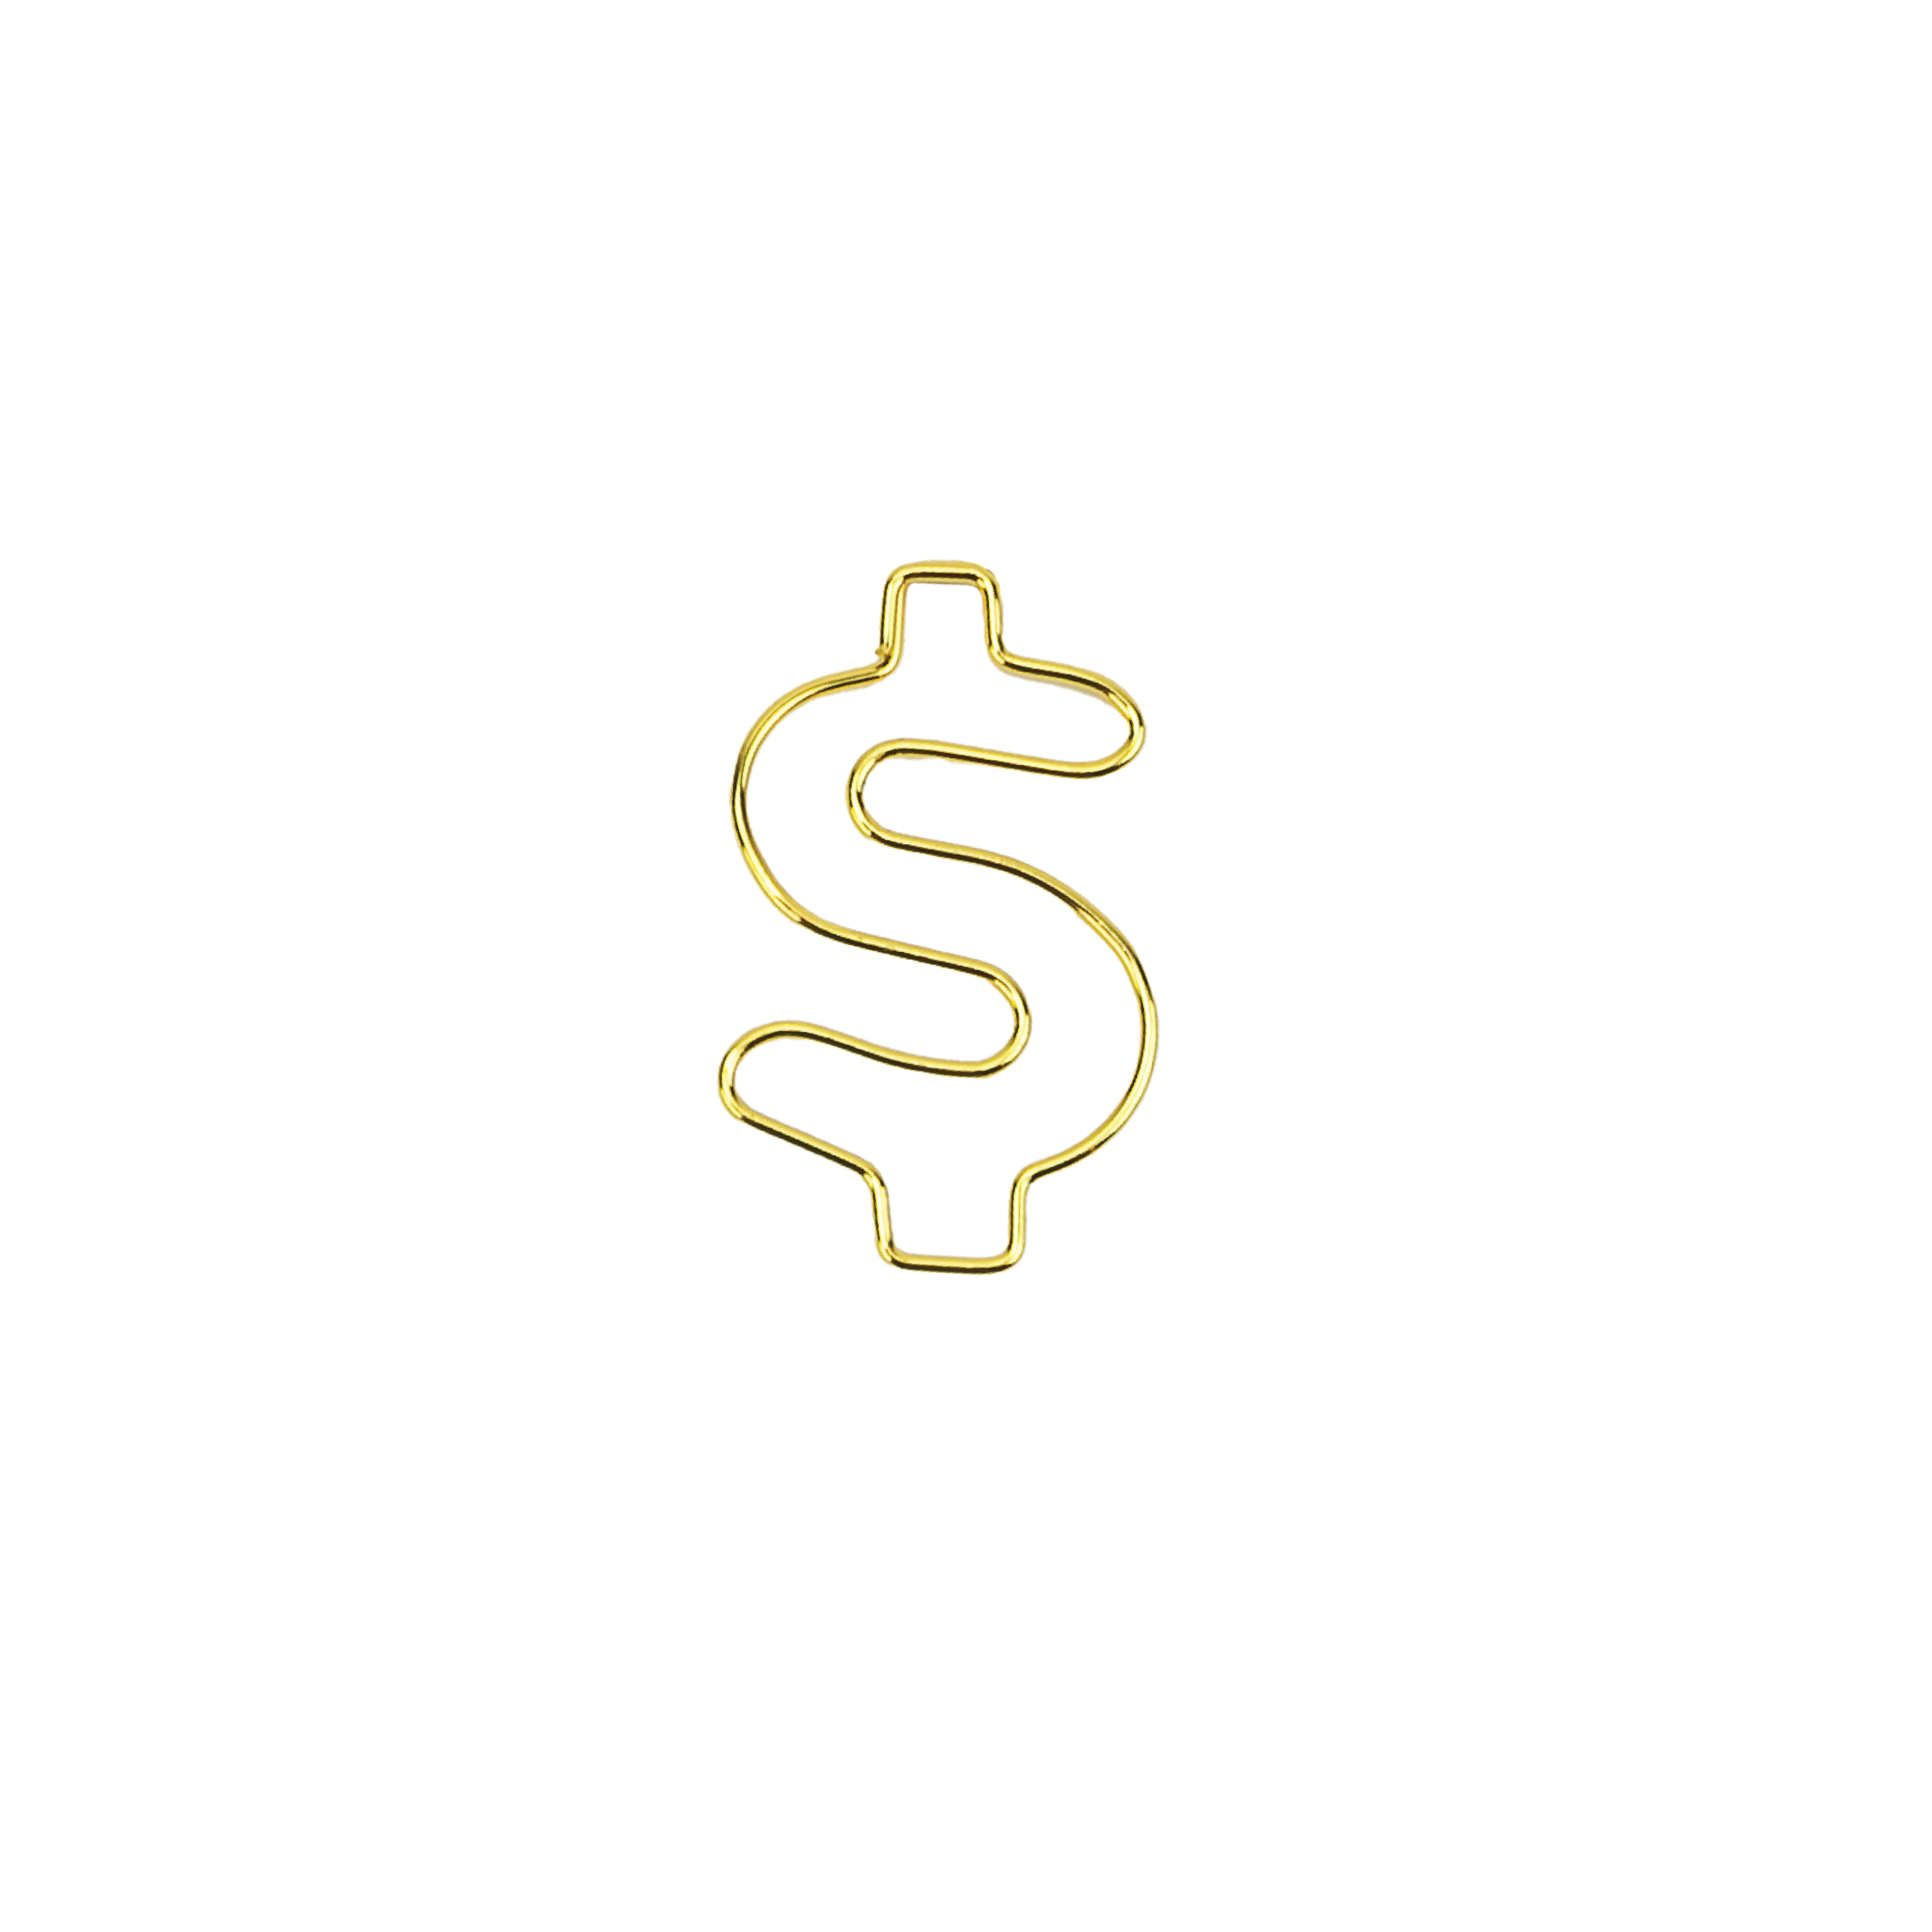 $ Dollar Sign - 25 Gold Paperclips